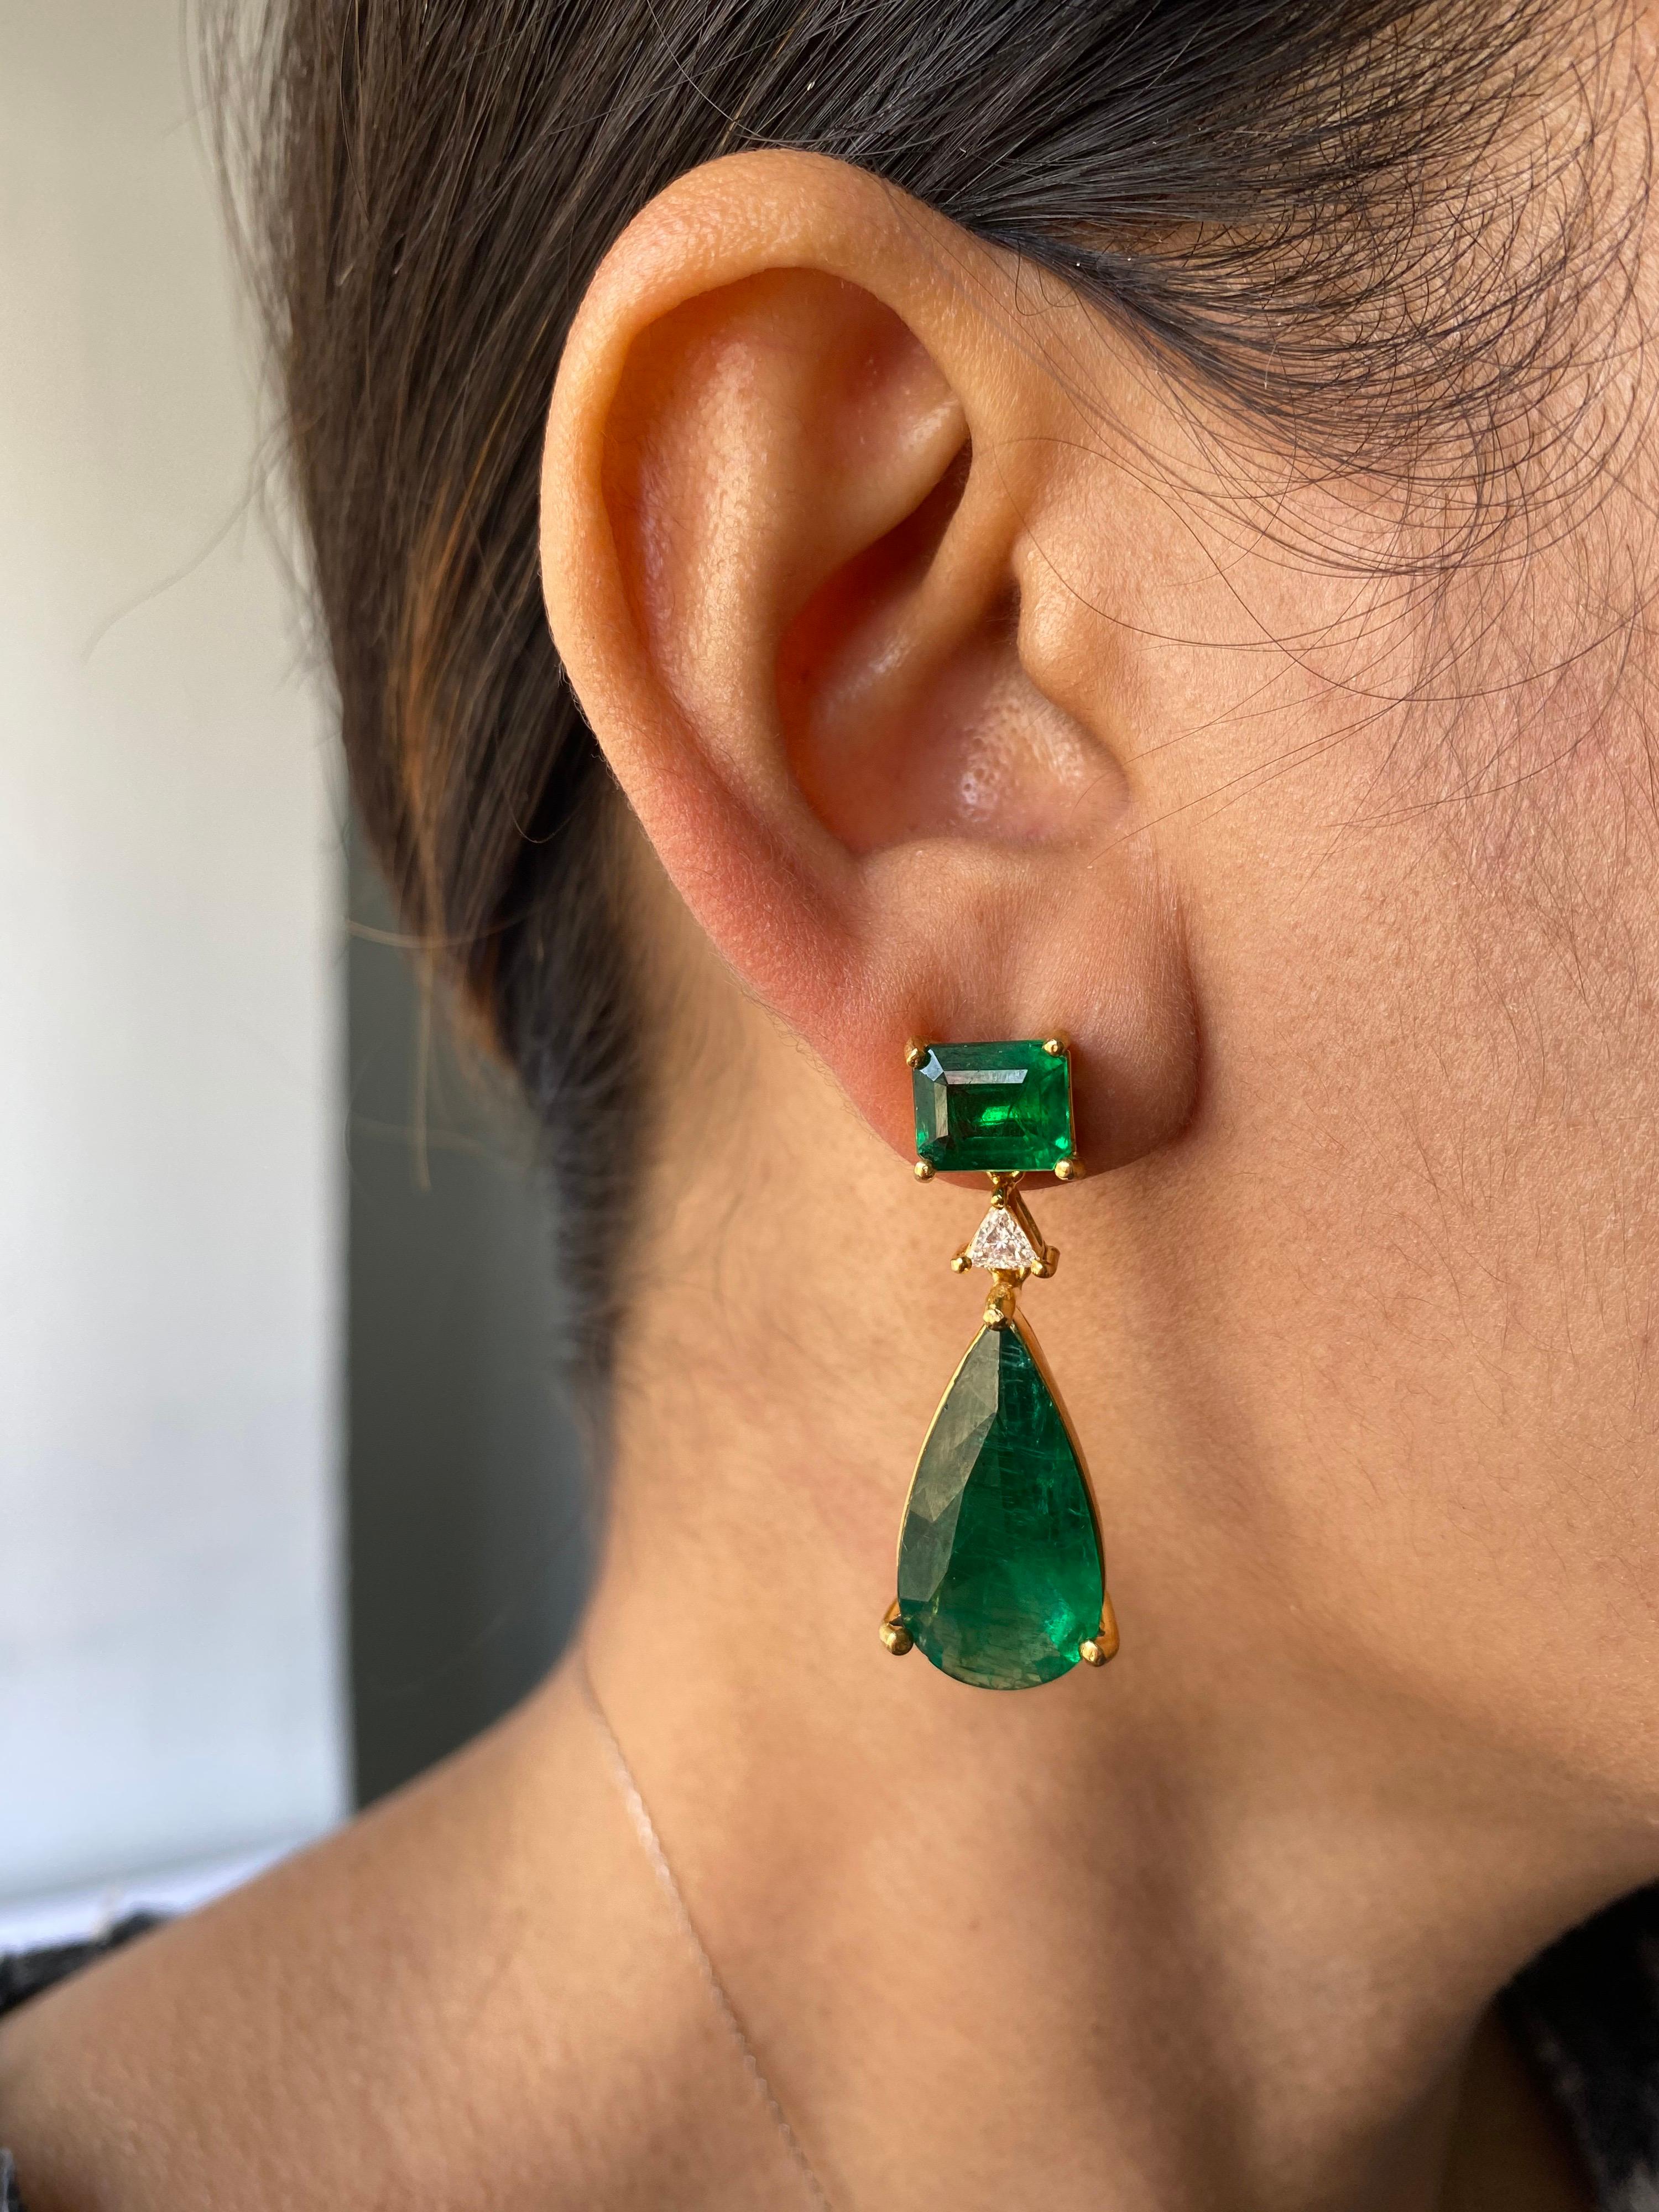 A classic and very elegant pair of Zambian Emerald earrings, with trillion shaped Diamond connecting the Emerald cut and Pear shape Emeralds, all set in solid 18K Yellow Gold. The Zambian Emeralds are transparent, with an ideal vivid green color and